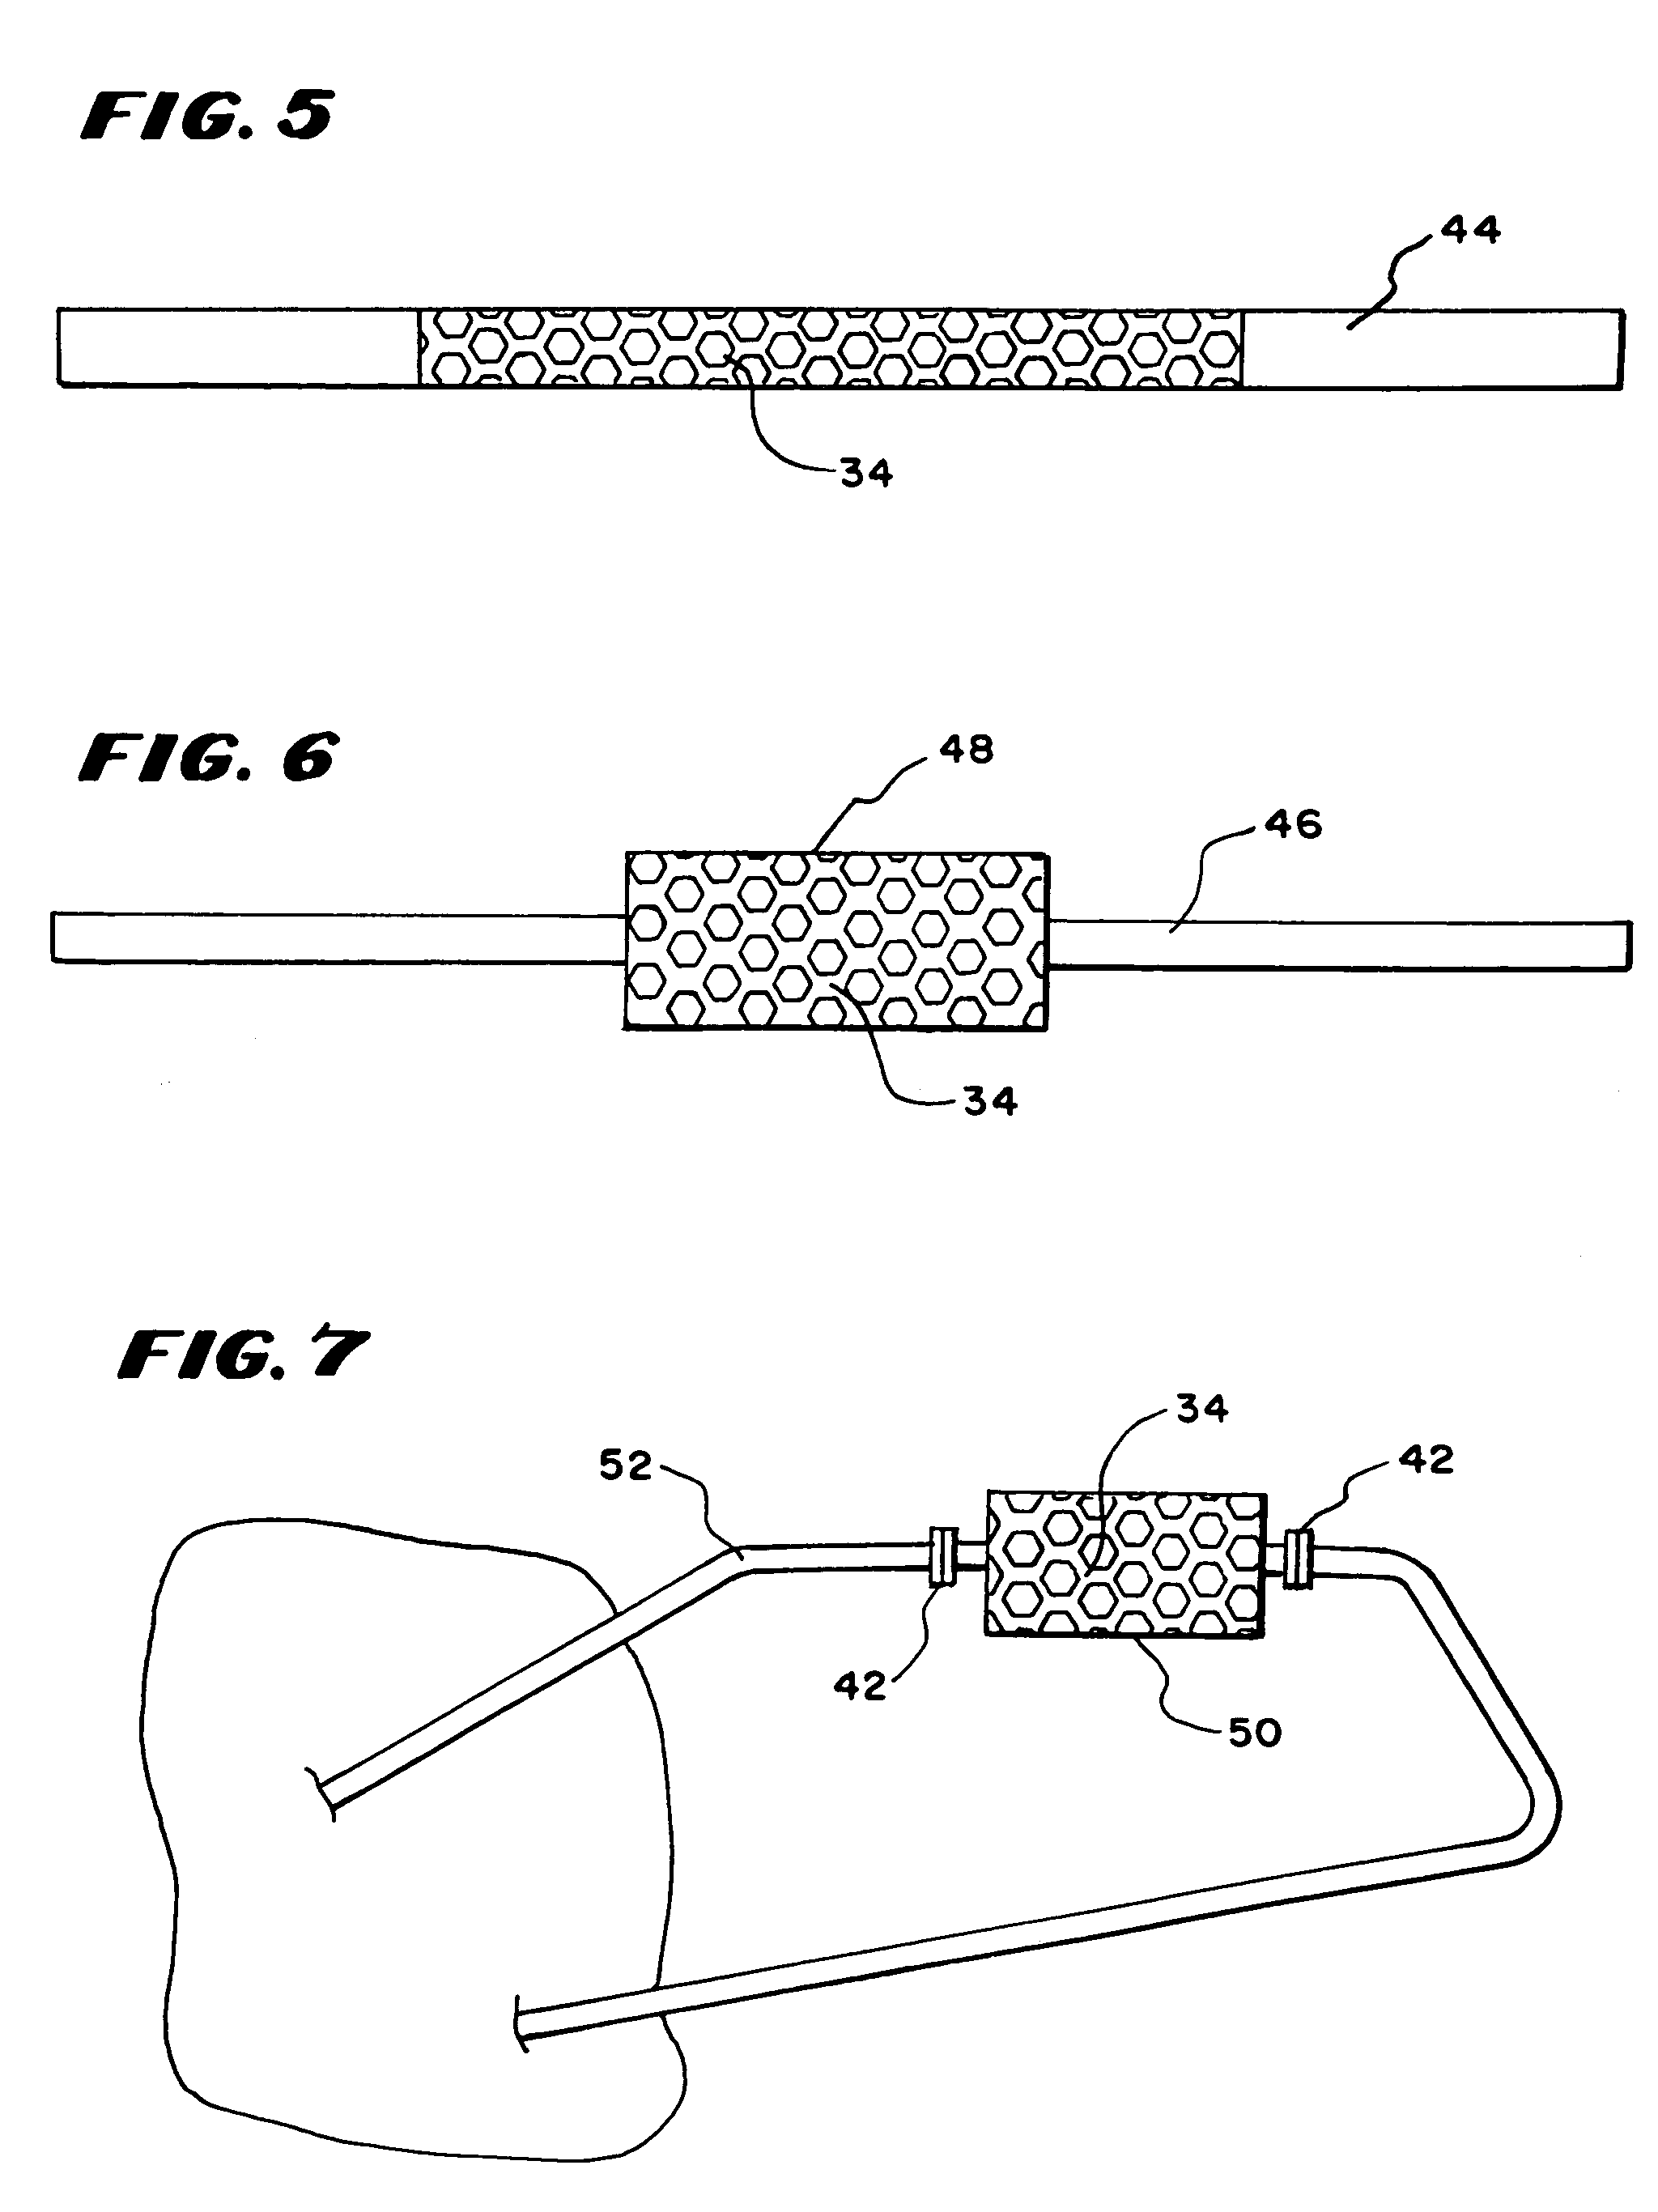 Devices, systems, and methods for reducing levels of pro-inflammatory or anti-inflammatory stimulators or mediators in the blood, generated as a result of extracorporeal blood processing